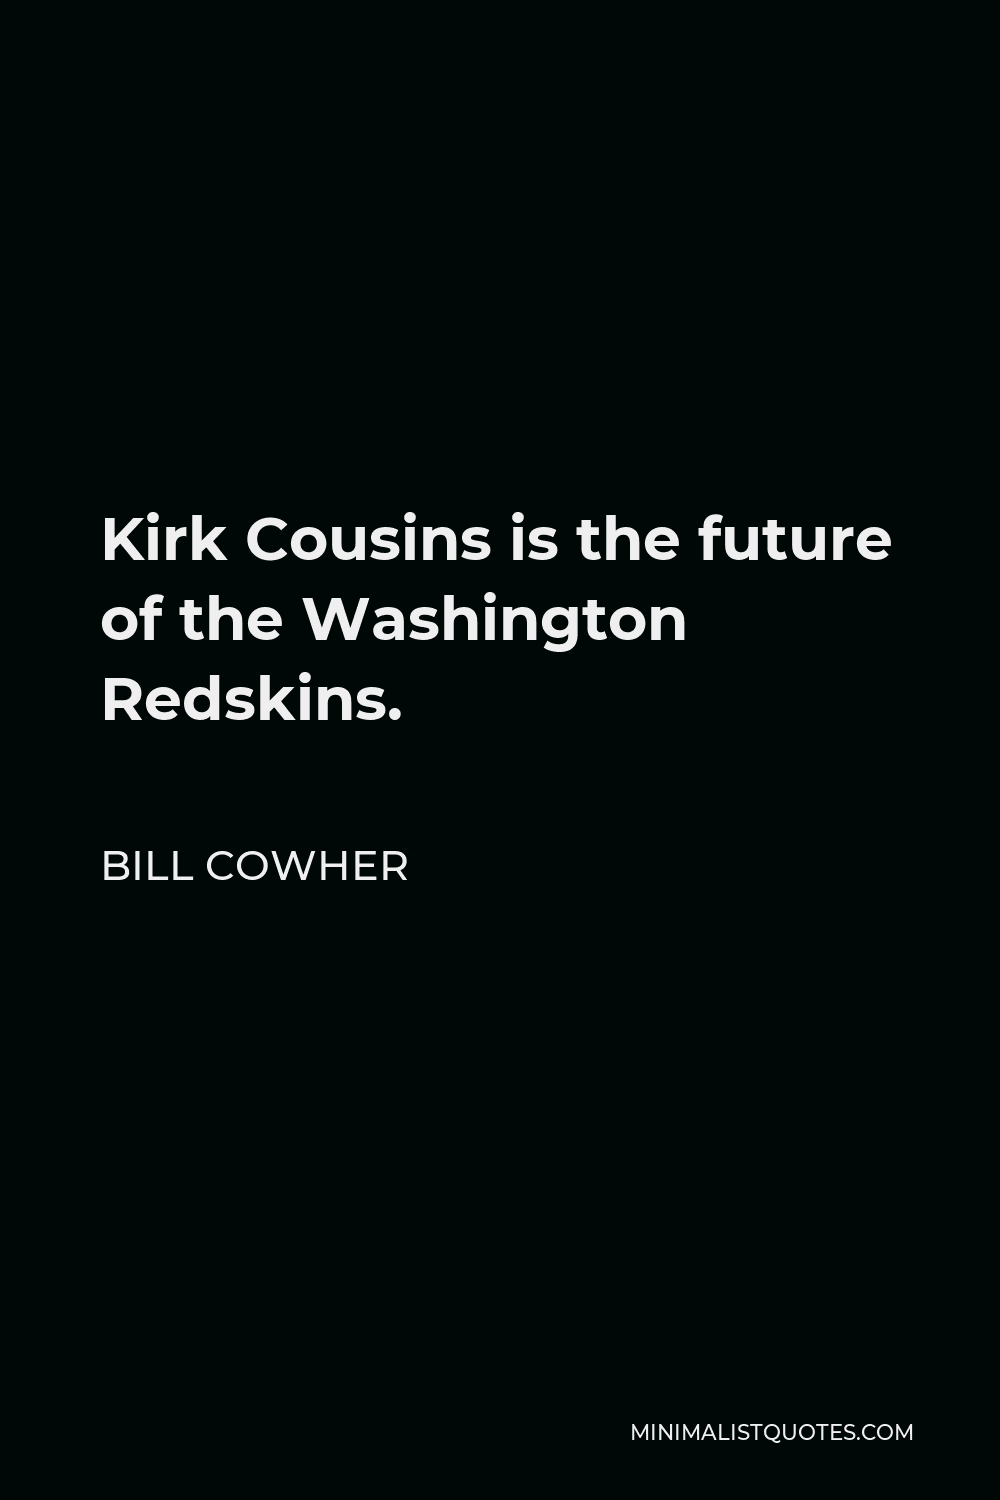 Bill Cowher Quote - Kirk Cousins is the future of the Washington Redskins.